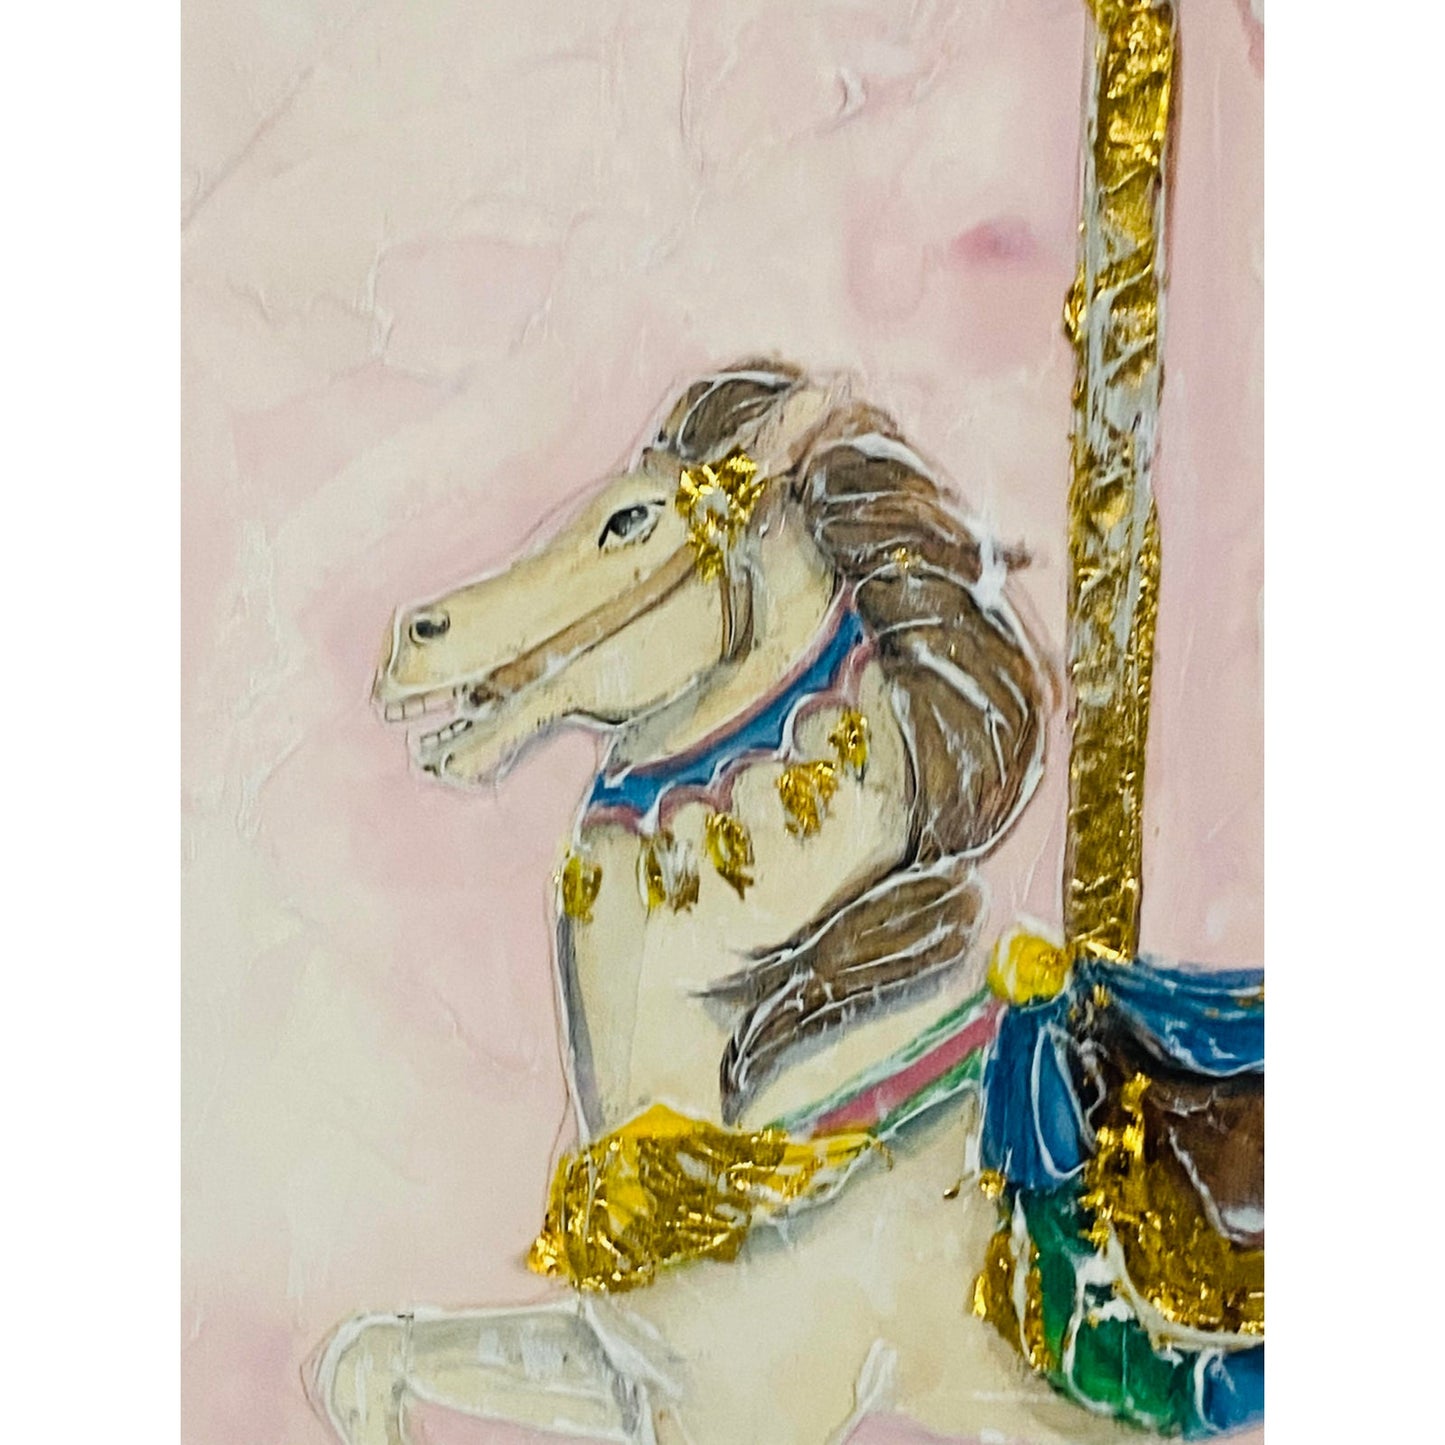 [SOLD] Carousel Painting Collage Horse by Christian Allen